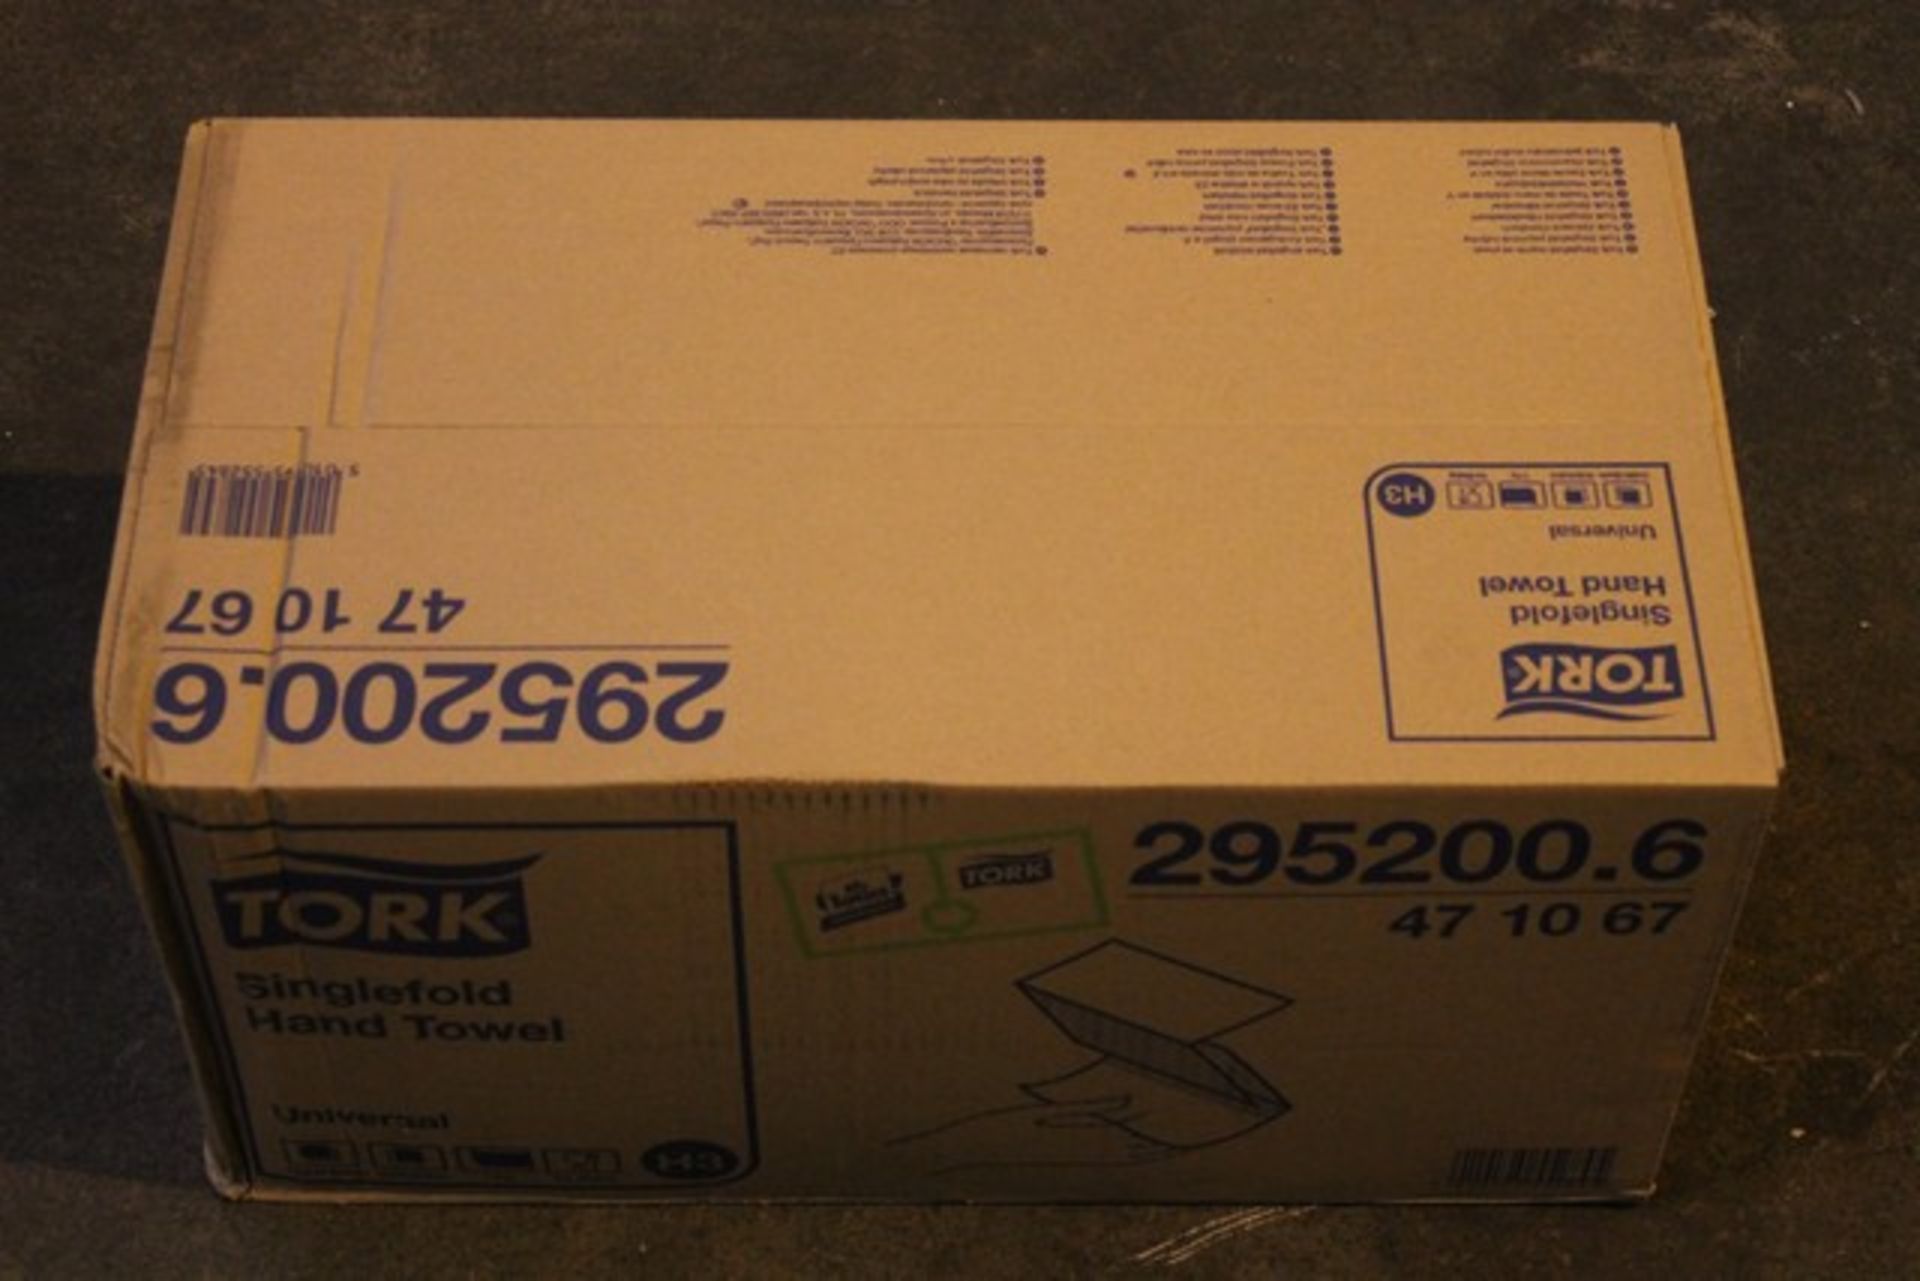 1 x BOX CONTAINING 16 PACKS OF TORK SINGLE FOLD HAND TOWELS   *PLEASE NOTE THAT THE BID PRICE IS